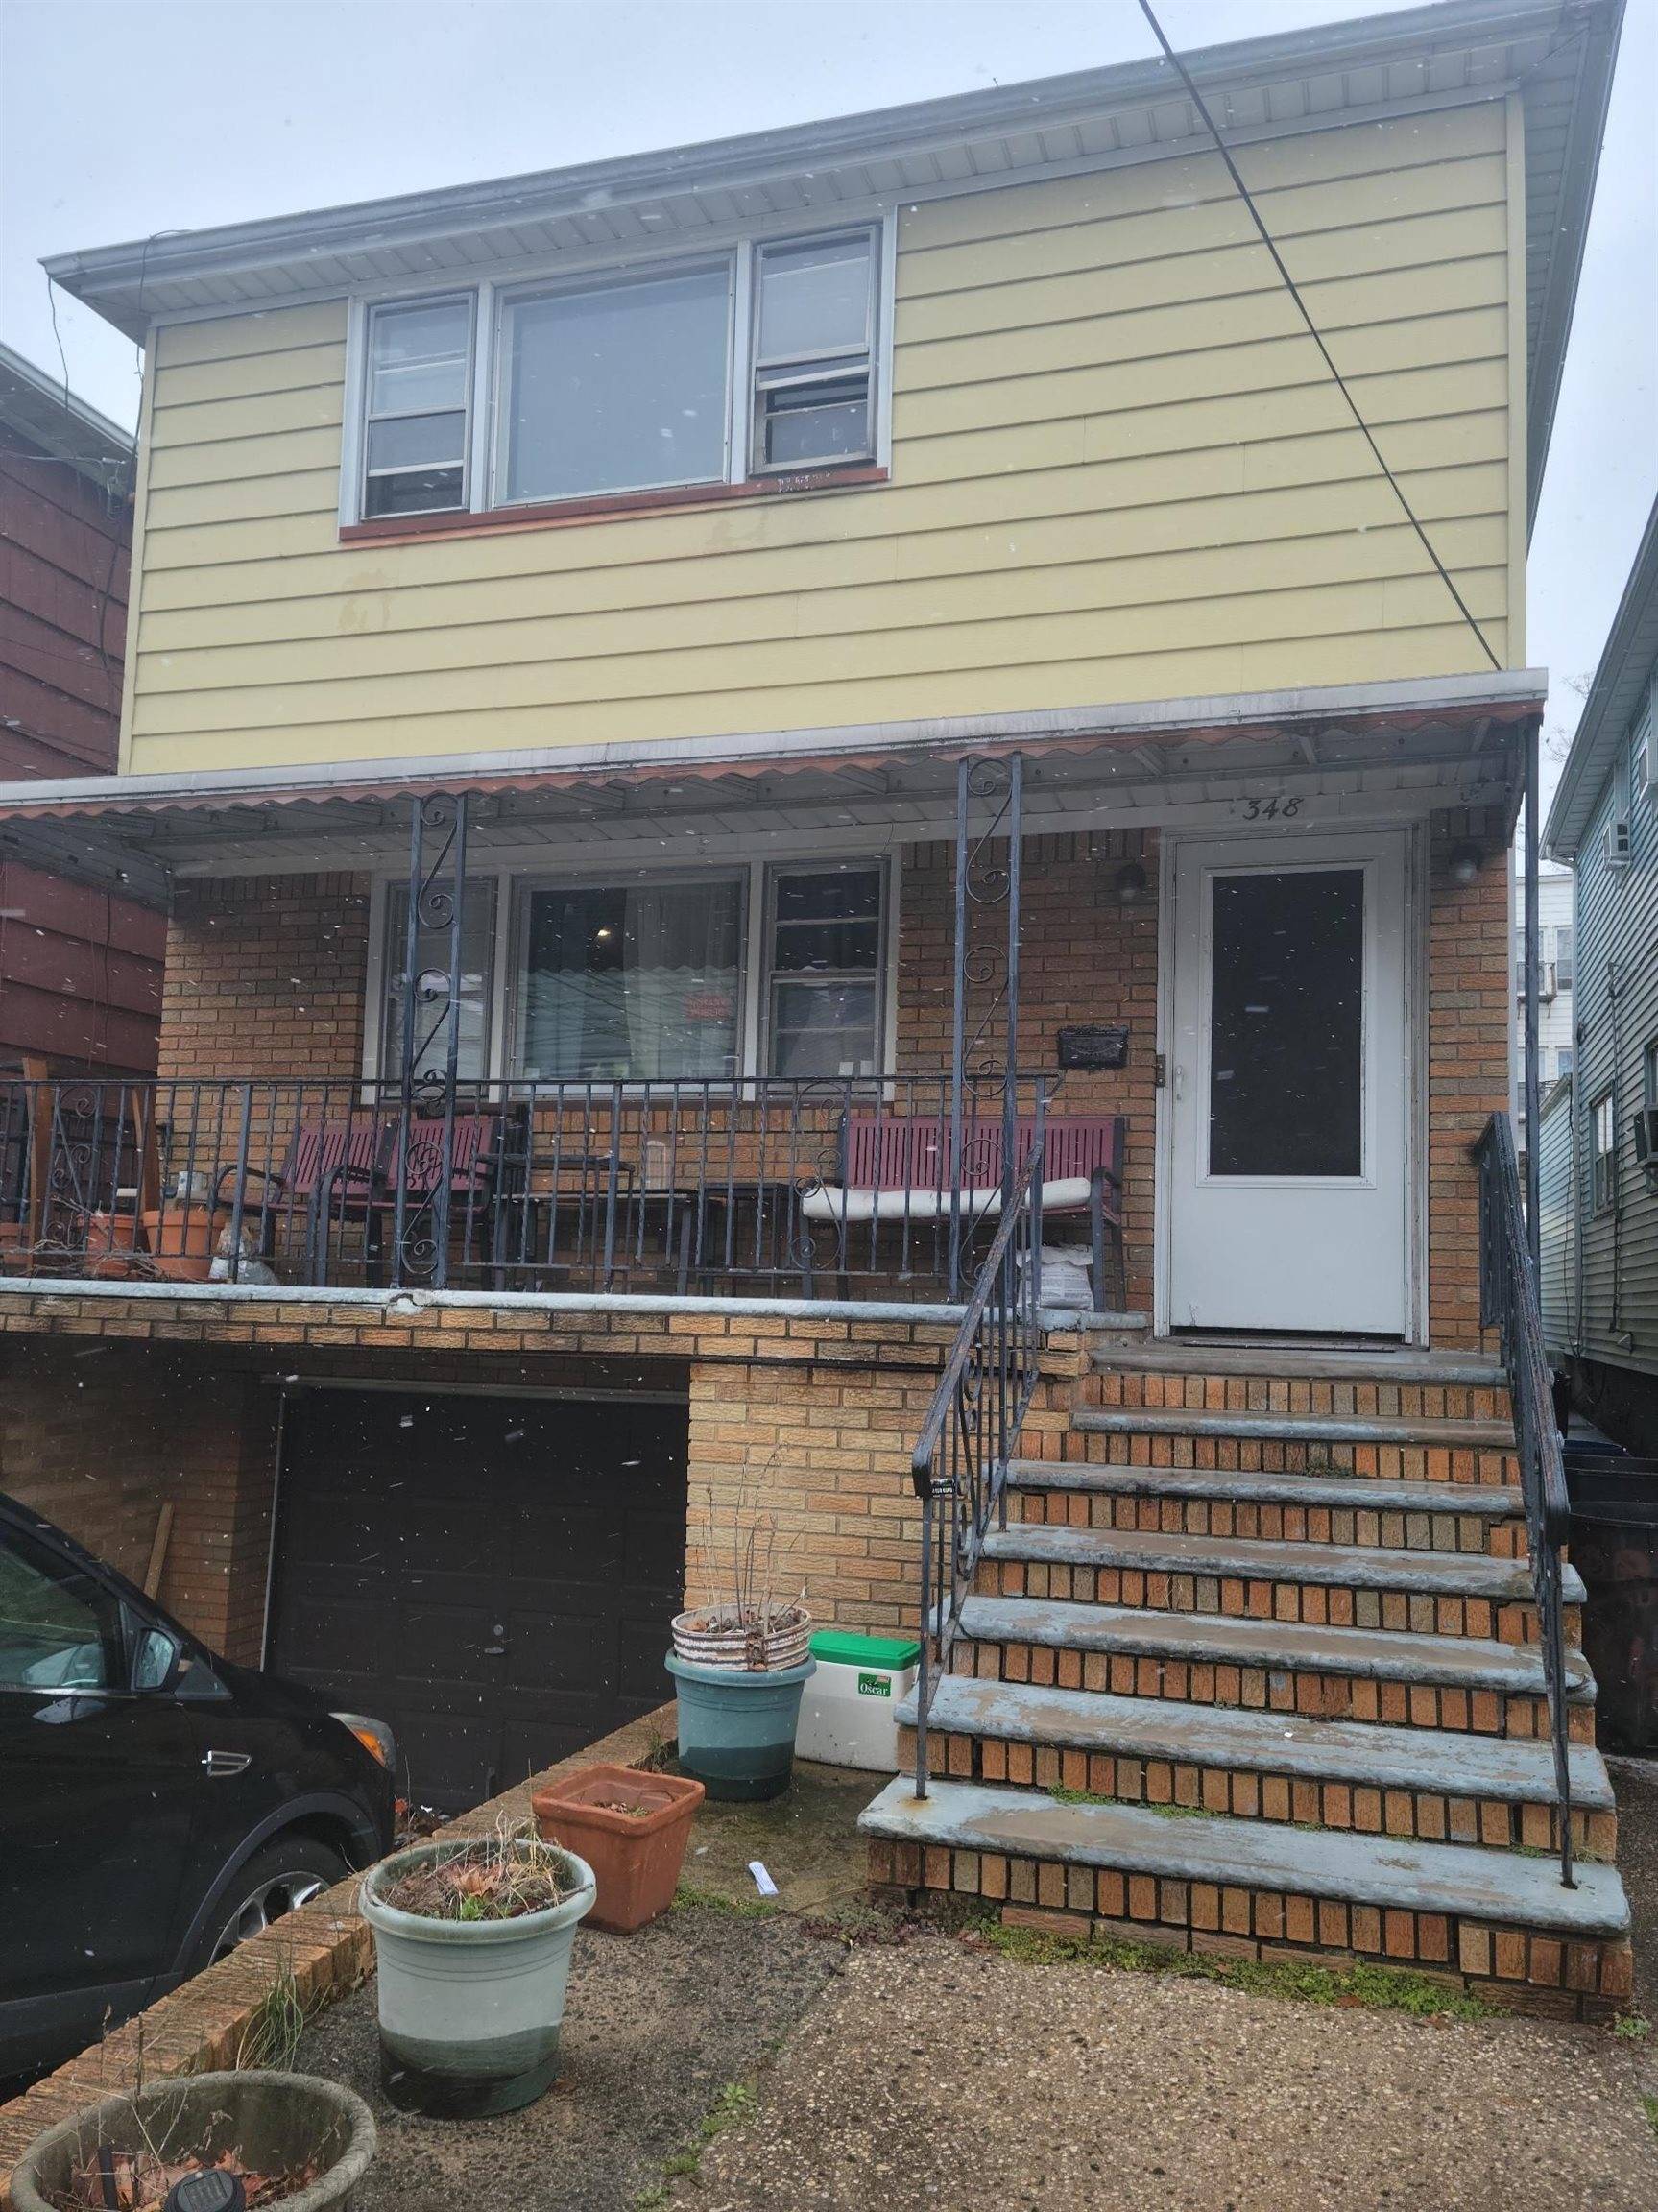 348 CATOR AVE Multi-Family New Jersey